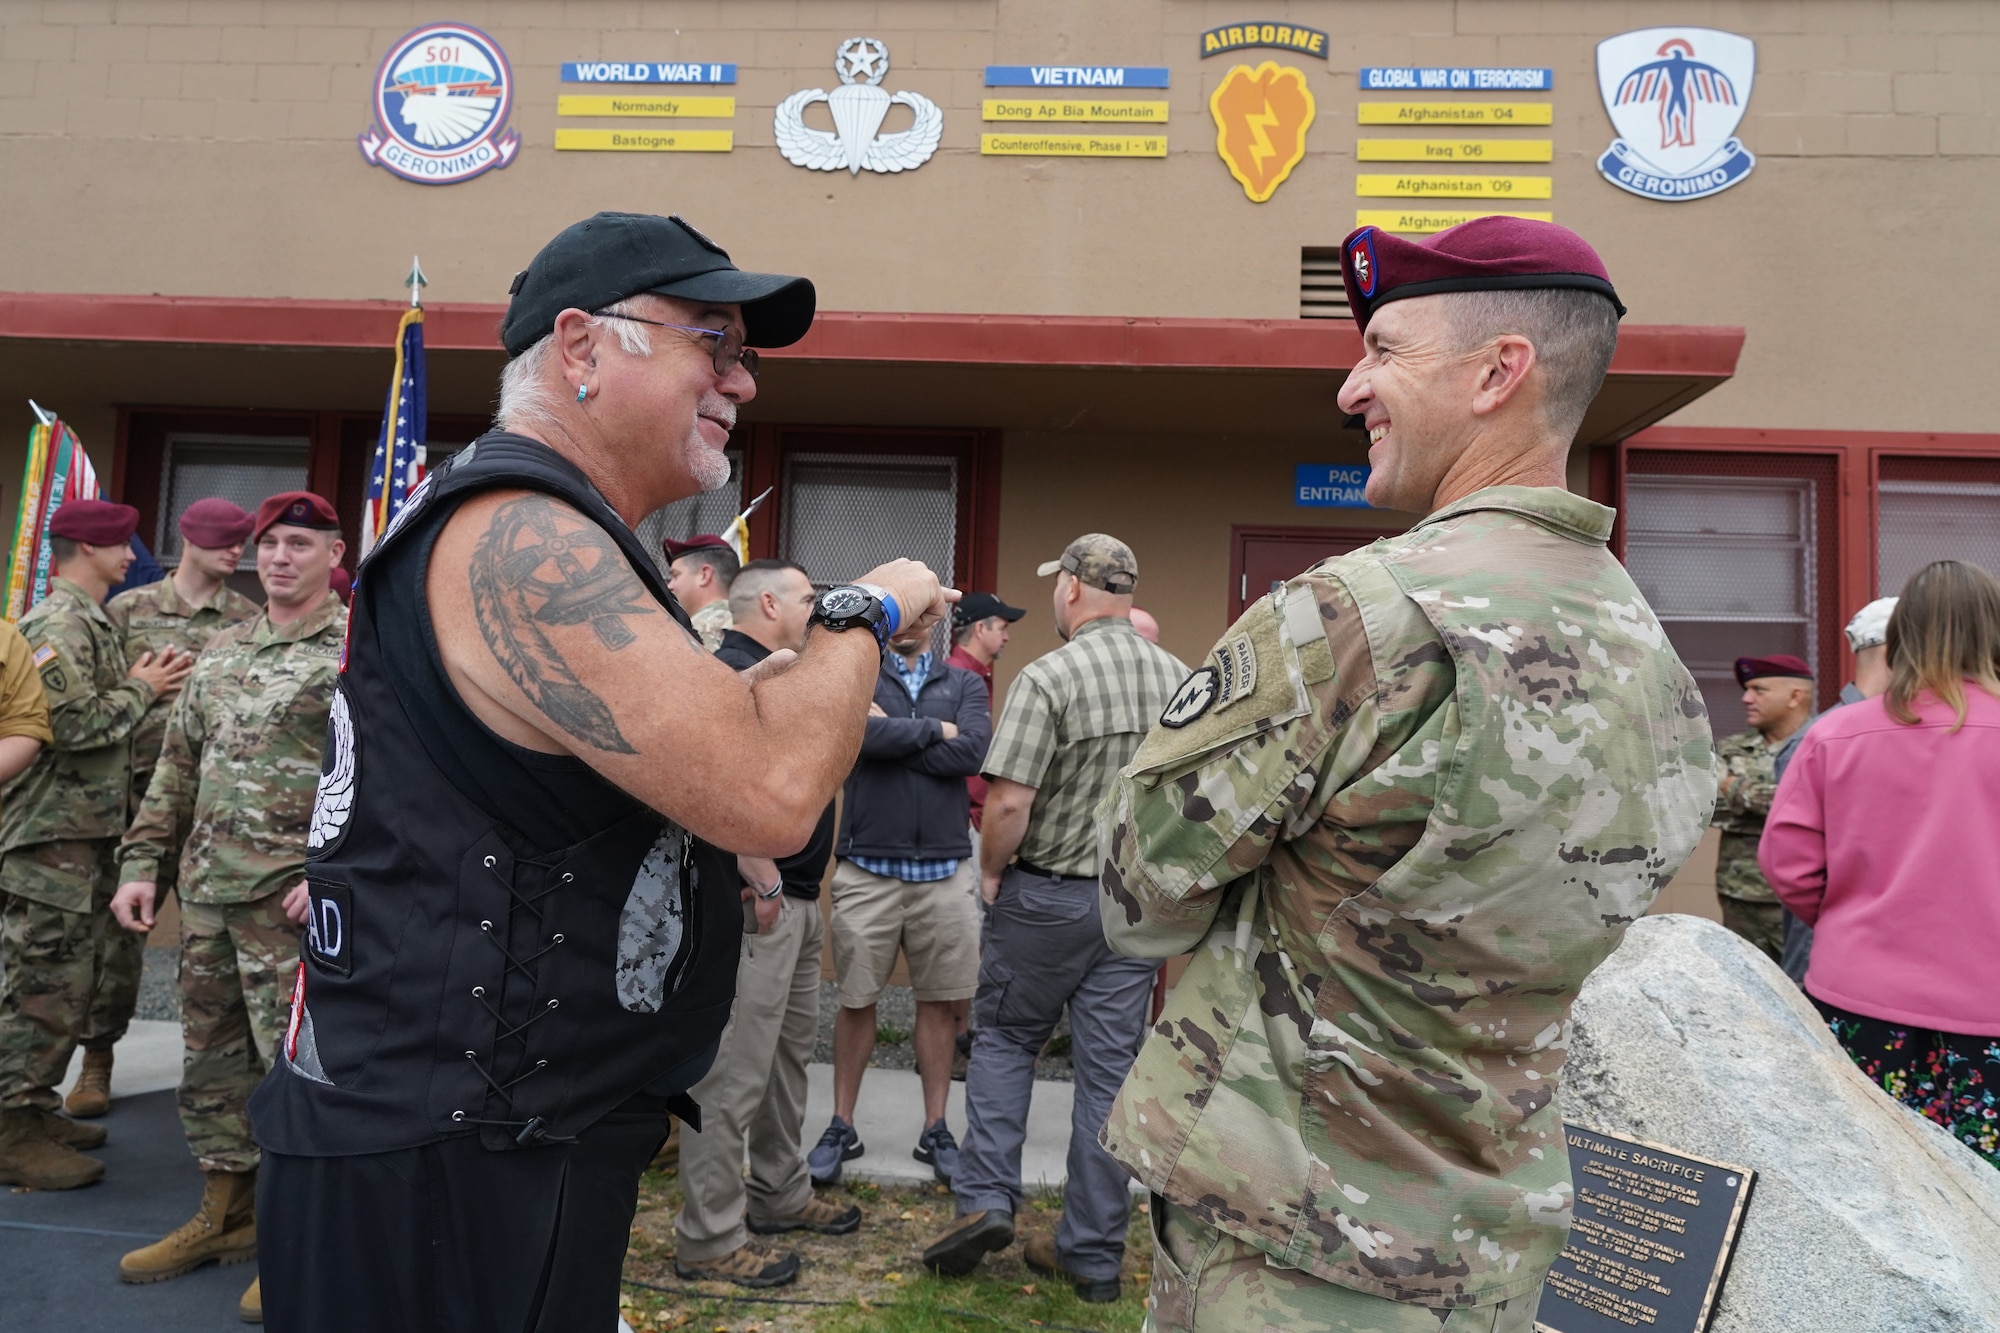 Retired Army 1st Sgt. Lee “Scrounger” Cromwell, of Pinehurst, NC, left, talks with Army Lt. Col. Matt Myer, the commander of 1st Battalion, 501st Parachute Infantry Regiment, 4th Infantry Brigade Combat Team (Airborne), 25th Infantry Division, U.S. Army Alaska, as active-duty paratroopers, veterans of the unit, dependents, and honored guests gather for 'Geronimo Week' festivities on Joint Base Elmendorf-Richardson, Alaska, Aug. 14, 2019, celebrating the unit's lineage. The regiment was activated on Nov. 15, 1942, at Camp Toccoa, Ga., served with distinction in World War II, the Cold War, Vietnam, as well as the Global War on Terror and continues to uphold the high standards expected of an airborne unit in peacetime duties and on the field of battle.